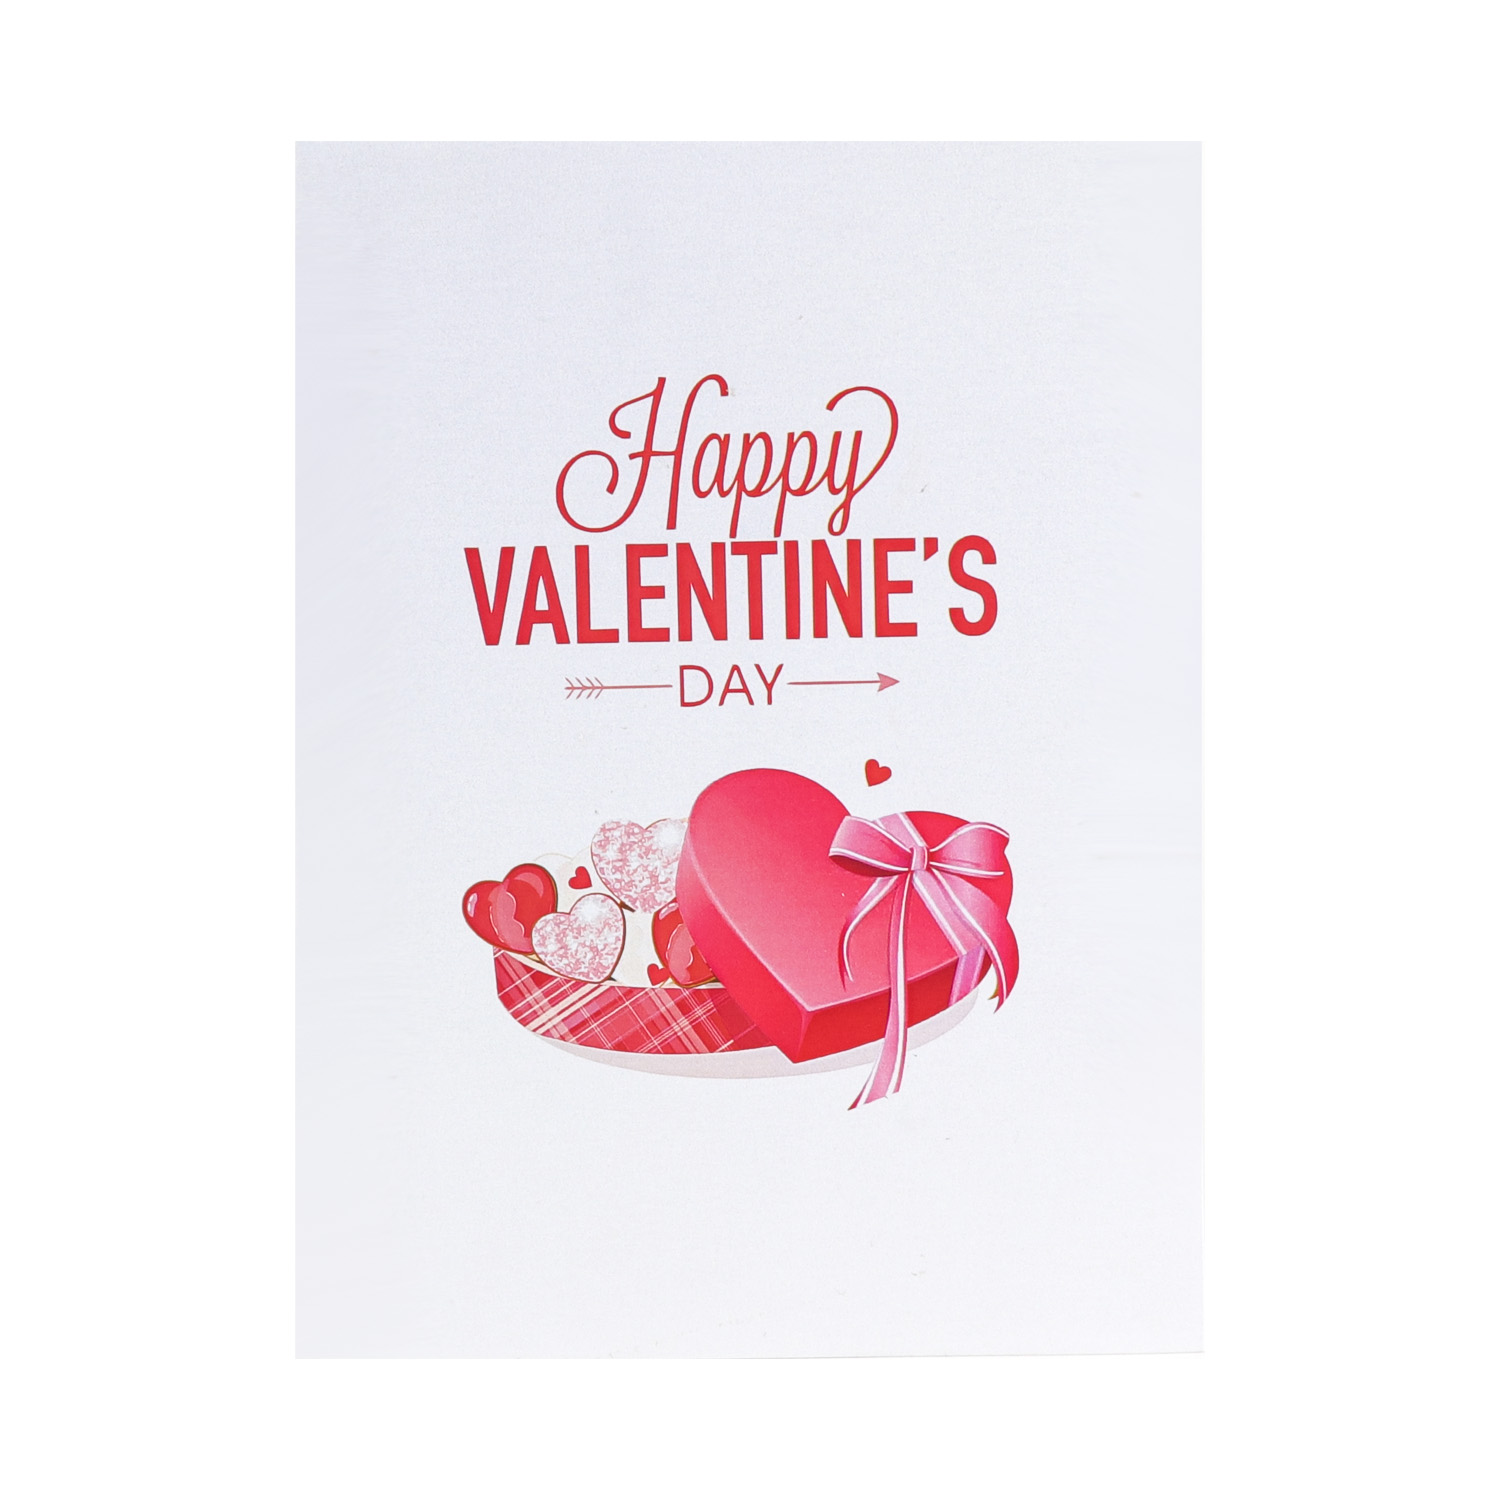 Valentine Heart Chocolate Pop Up Card - LV64-cover-pop up card wholesale manufacturer-valentine's day pop up card-flower pop up card-teddy 3d pop up greeting card